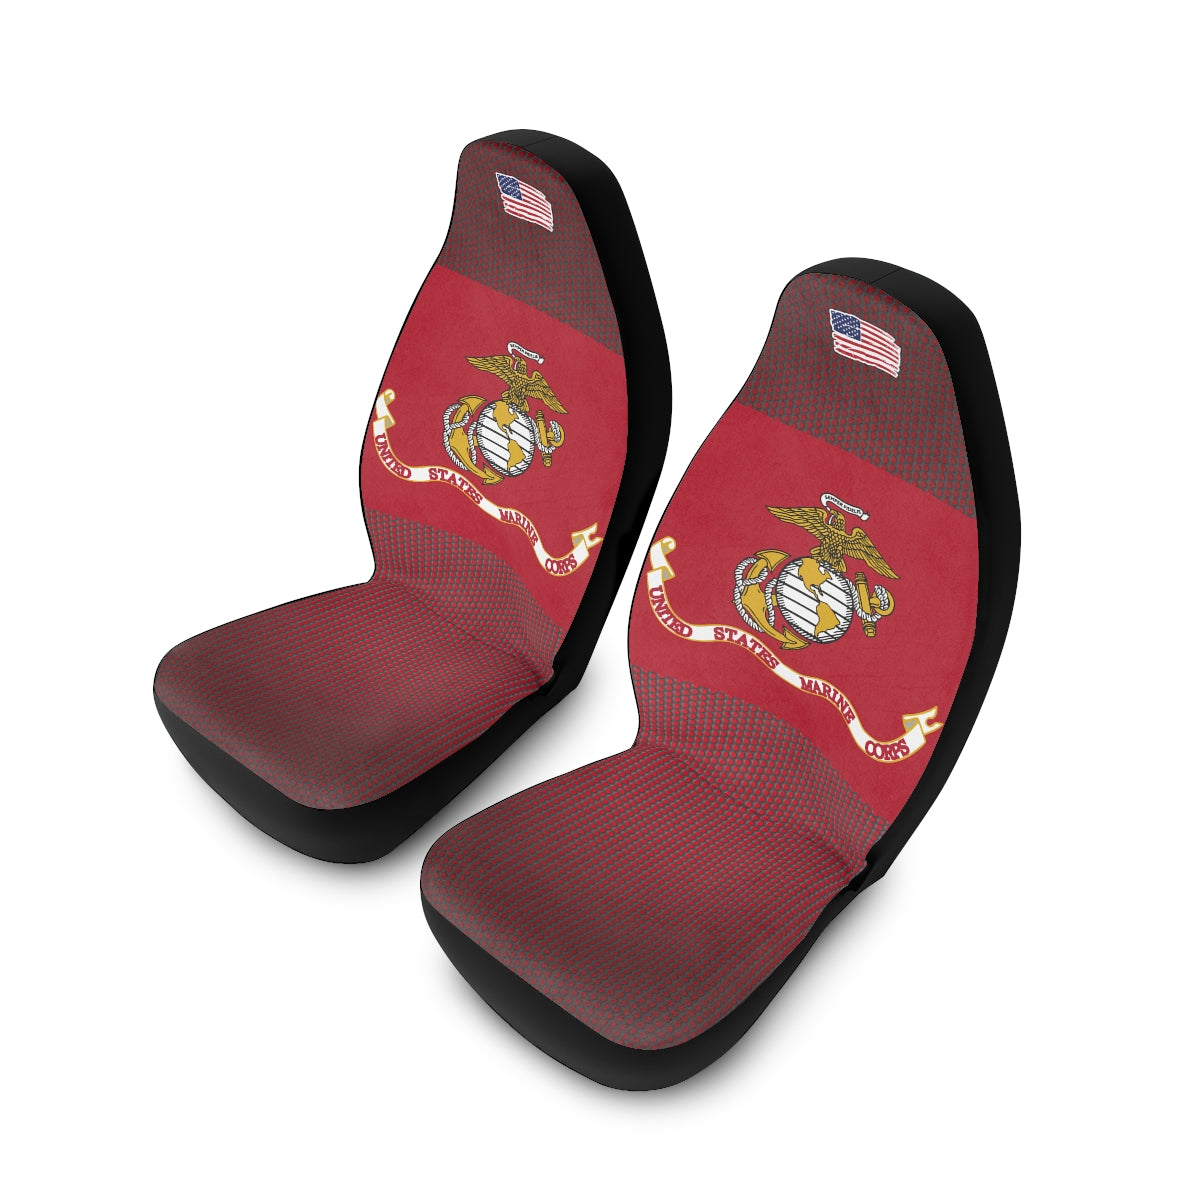 U.S. Marine Corps Dark Red Polyester Car Seat Covers